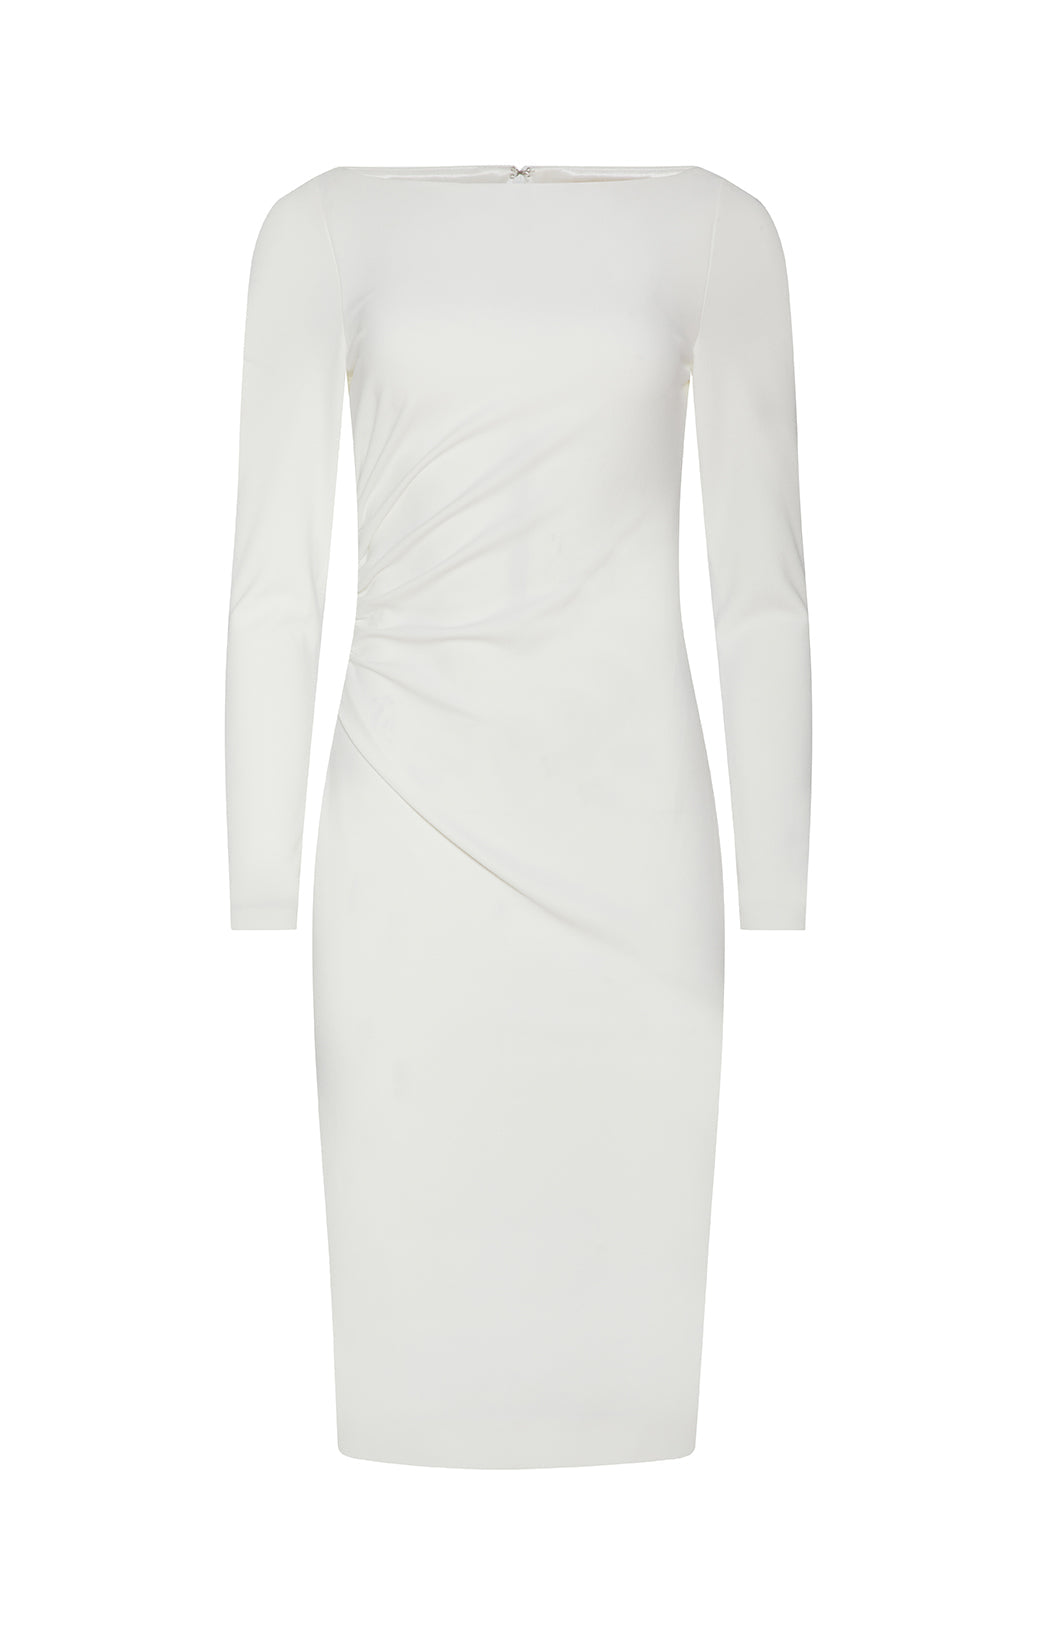 Silvery - Cashmere-Softened Cotton Dress - Product Image